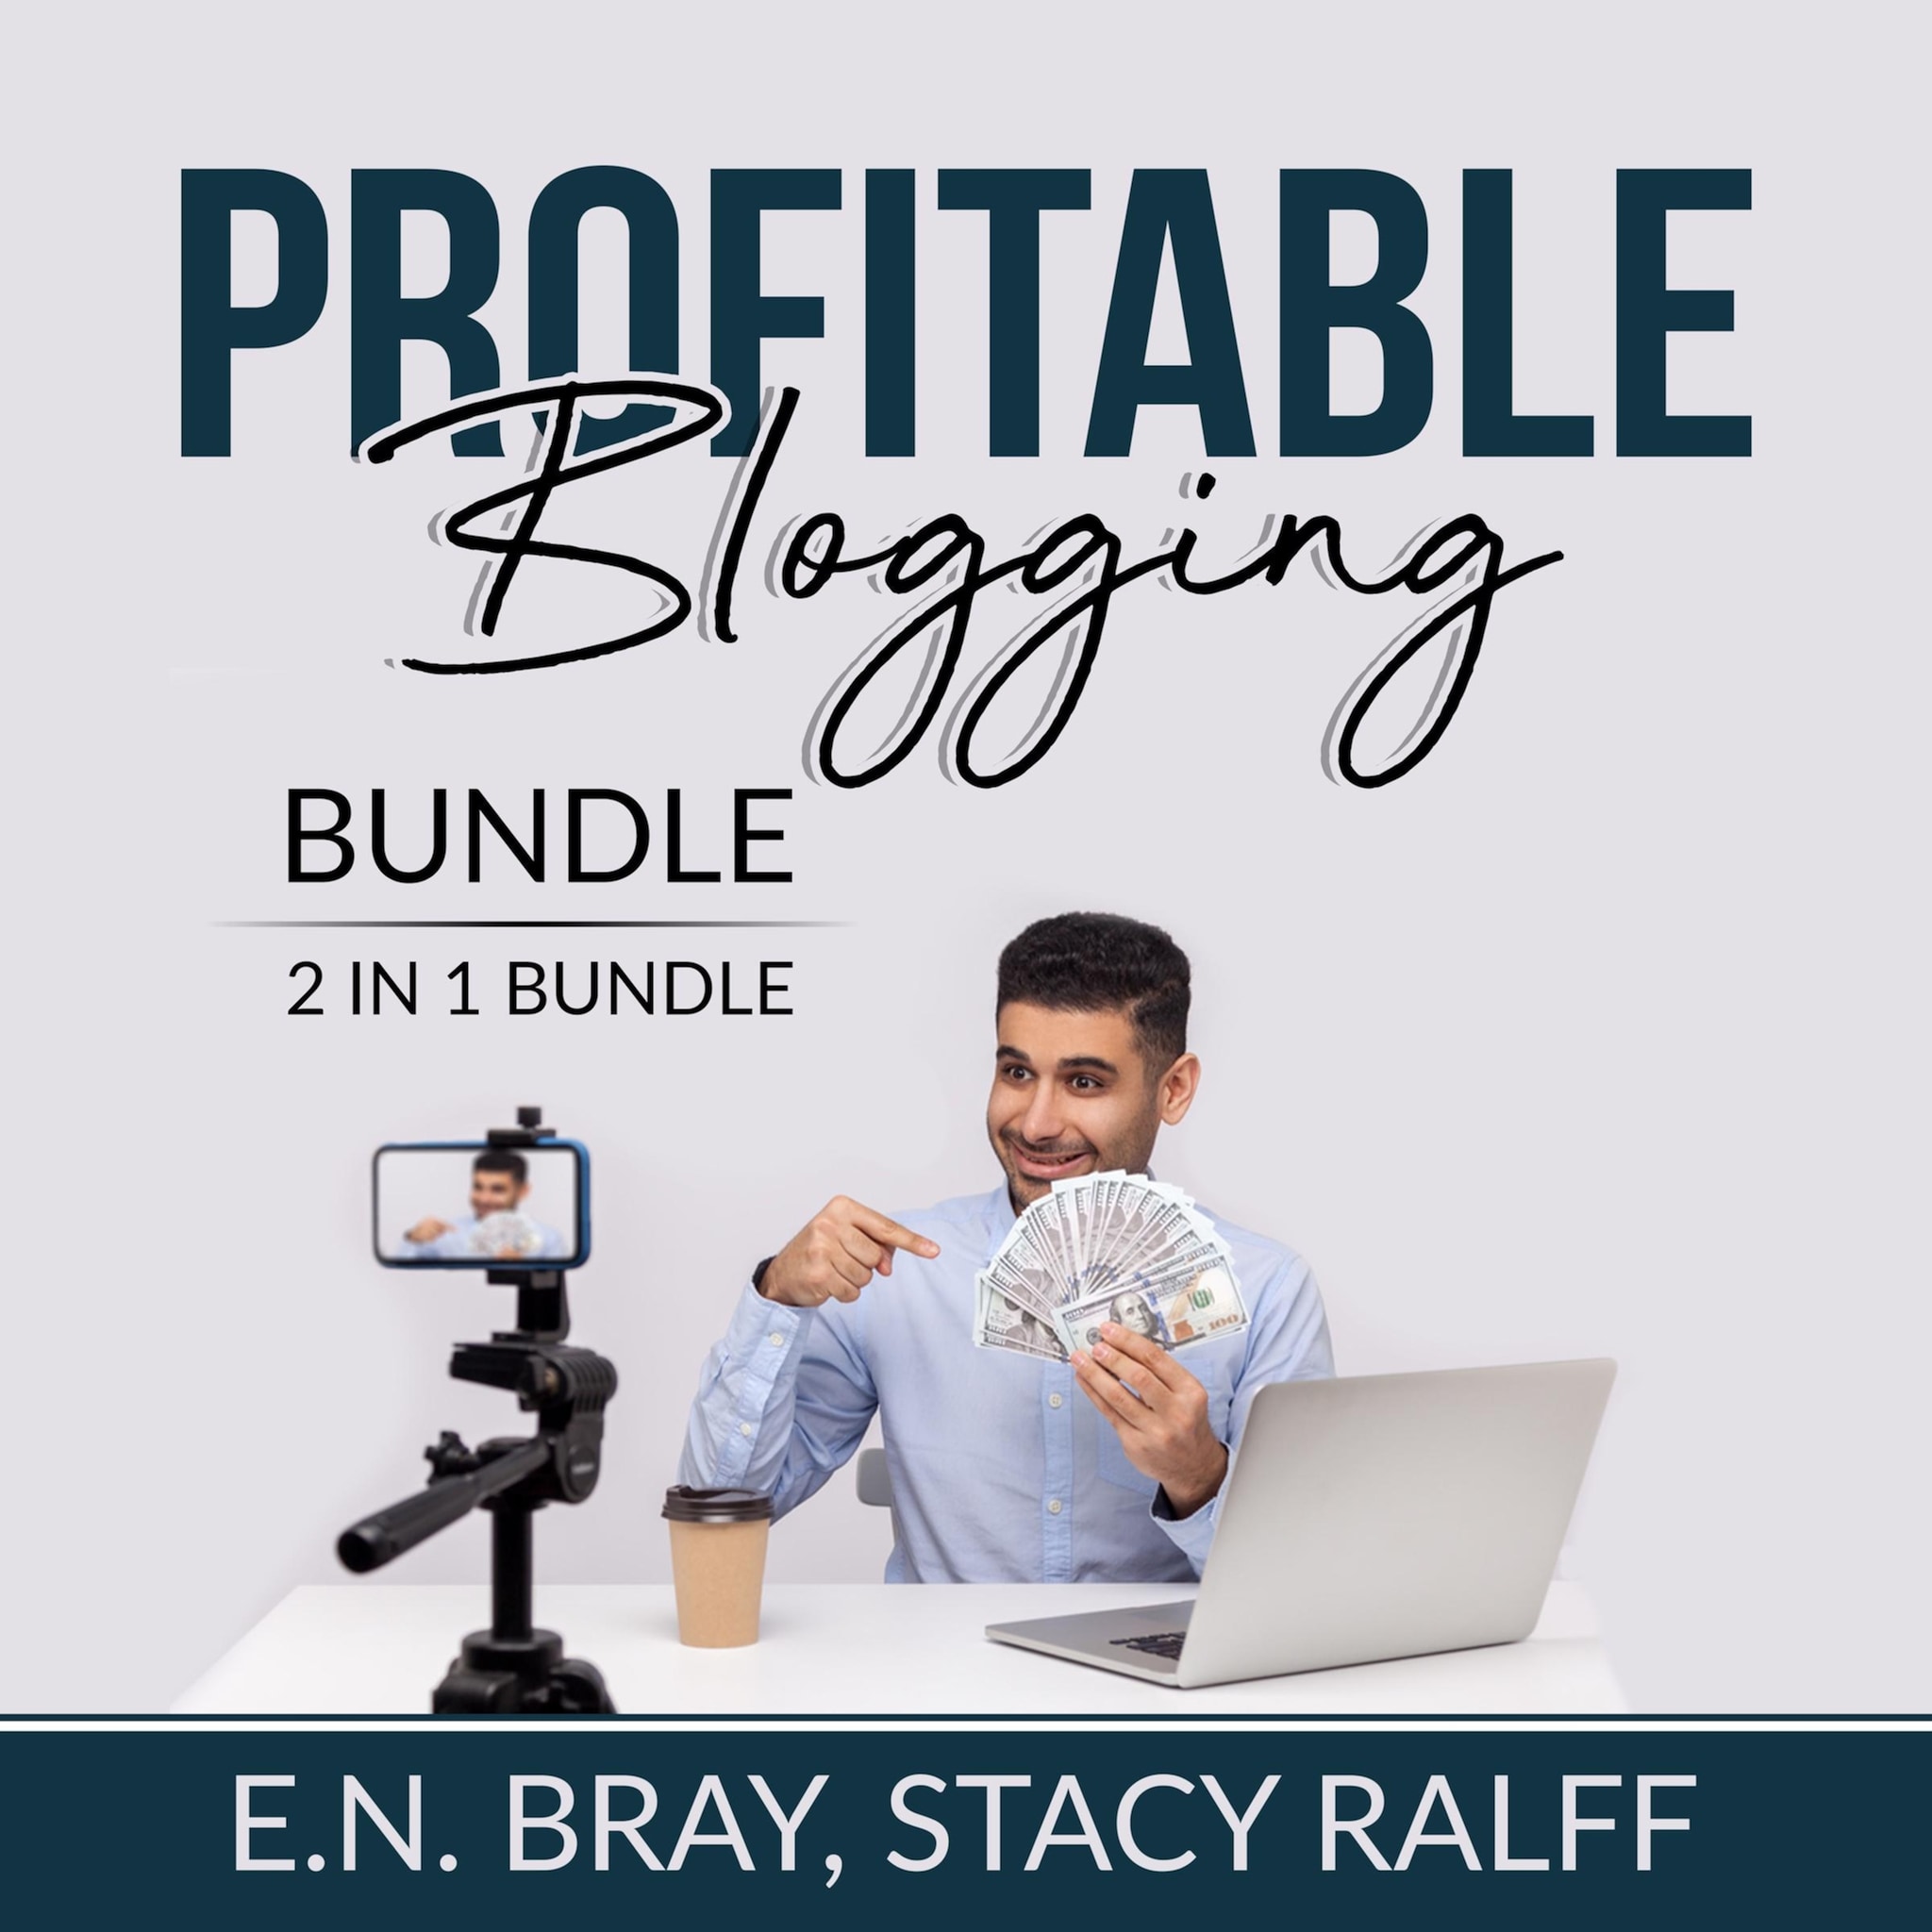 Profitable Blogging Bundle, 2 IN 1 Bundle: Make a Living With Blog Writing and Make Money From Blogging ilmaiseksi